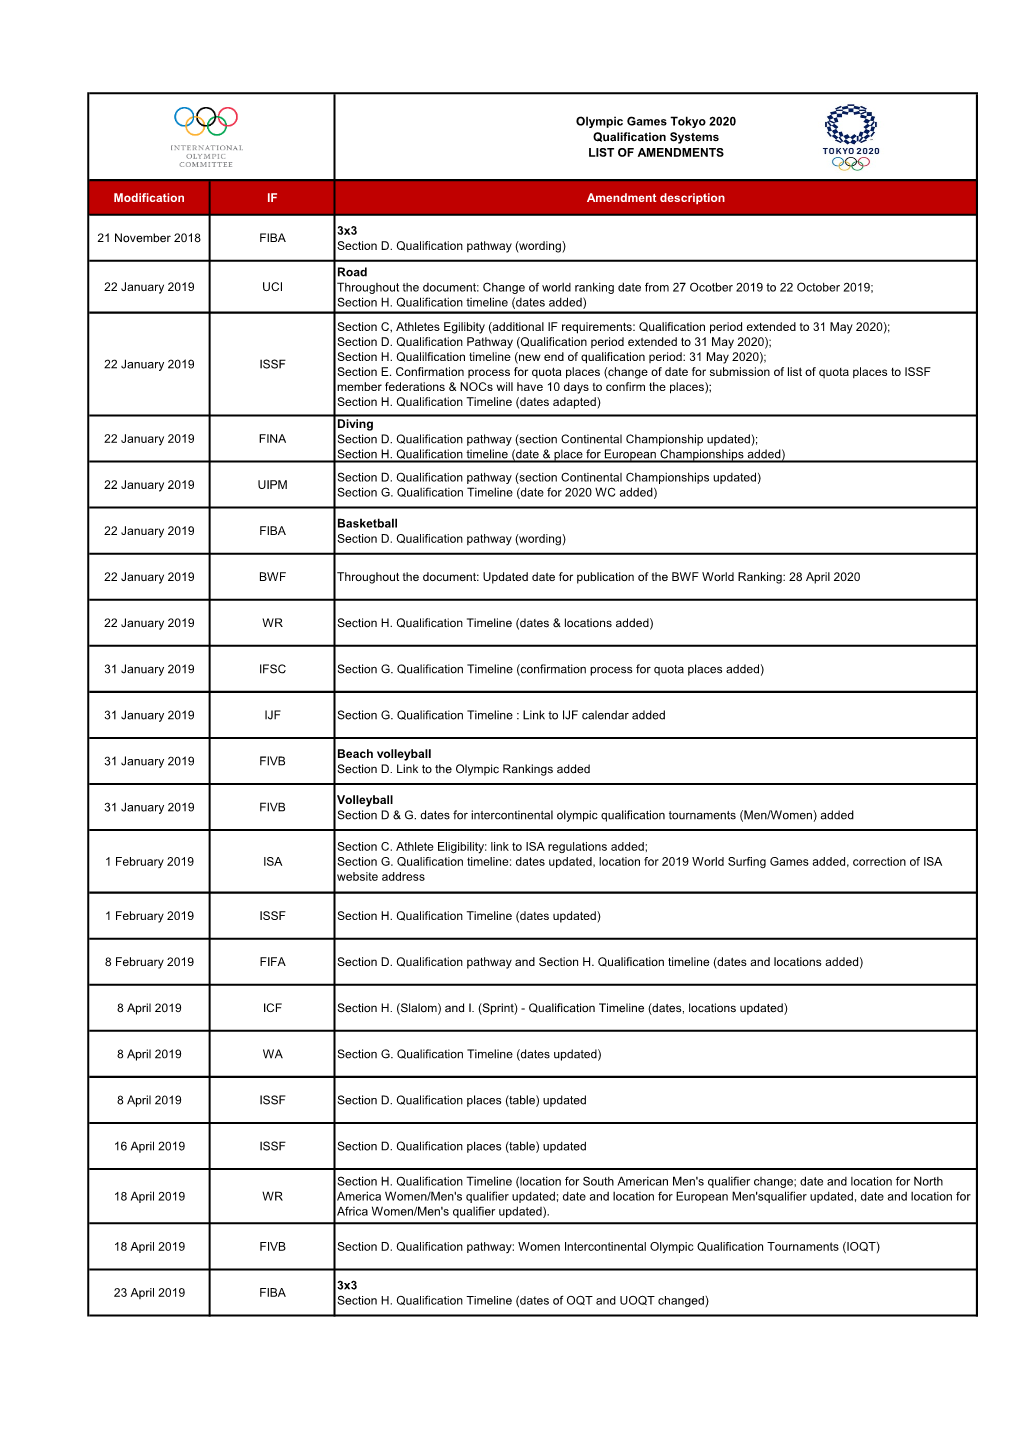 Olympic Games Tokyo 2020 Qualification Systems LIST of AMENDMENTS